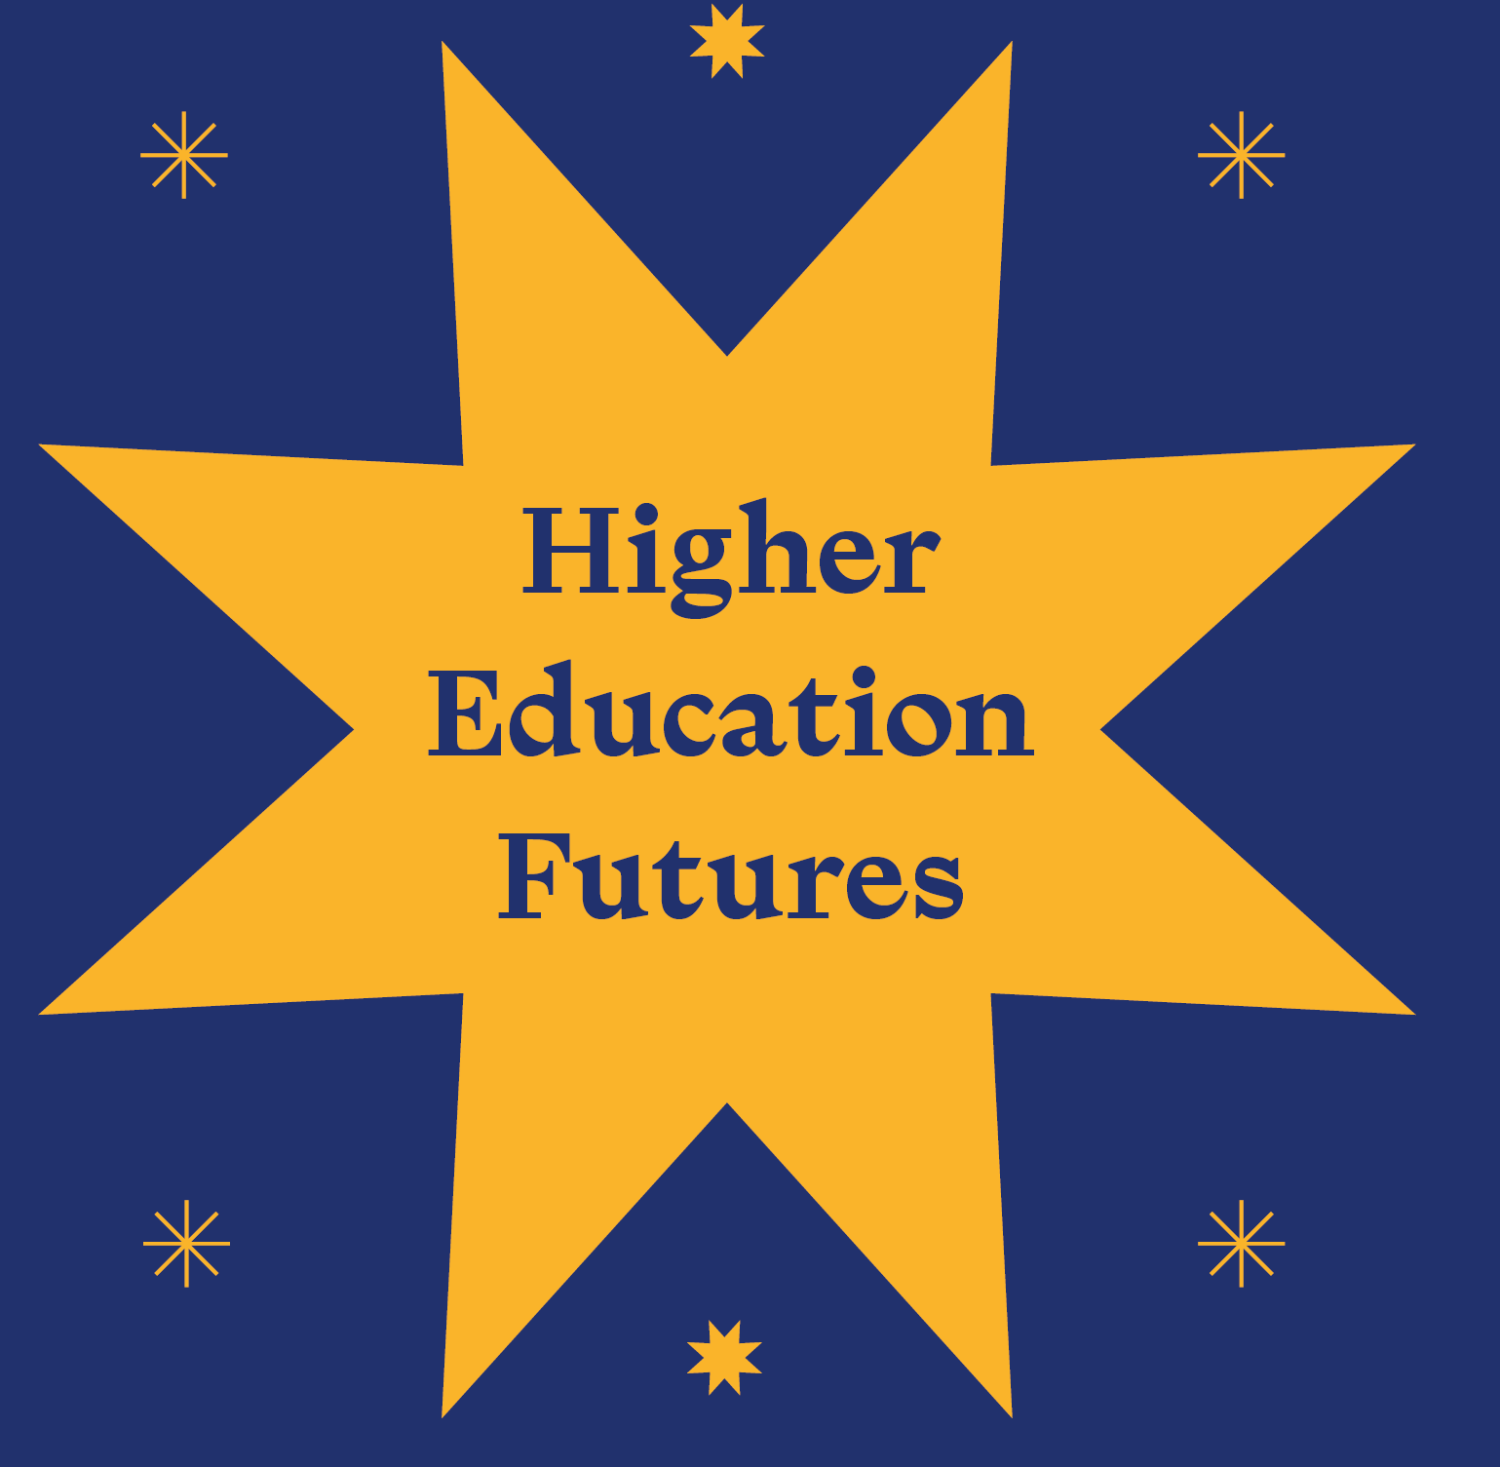 Decorative image of Star with the text 'Higher Education Futures'